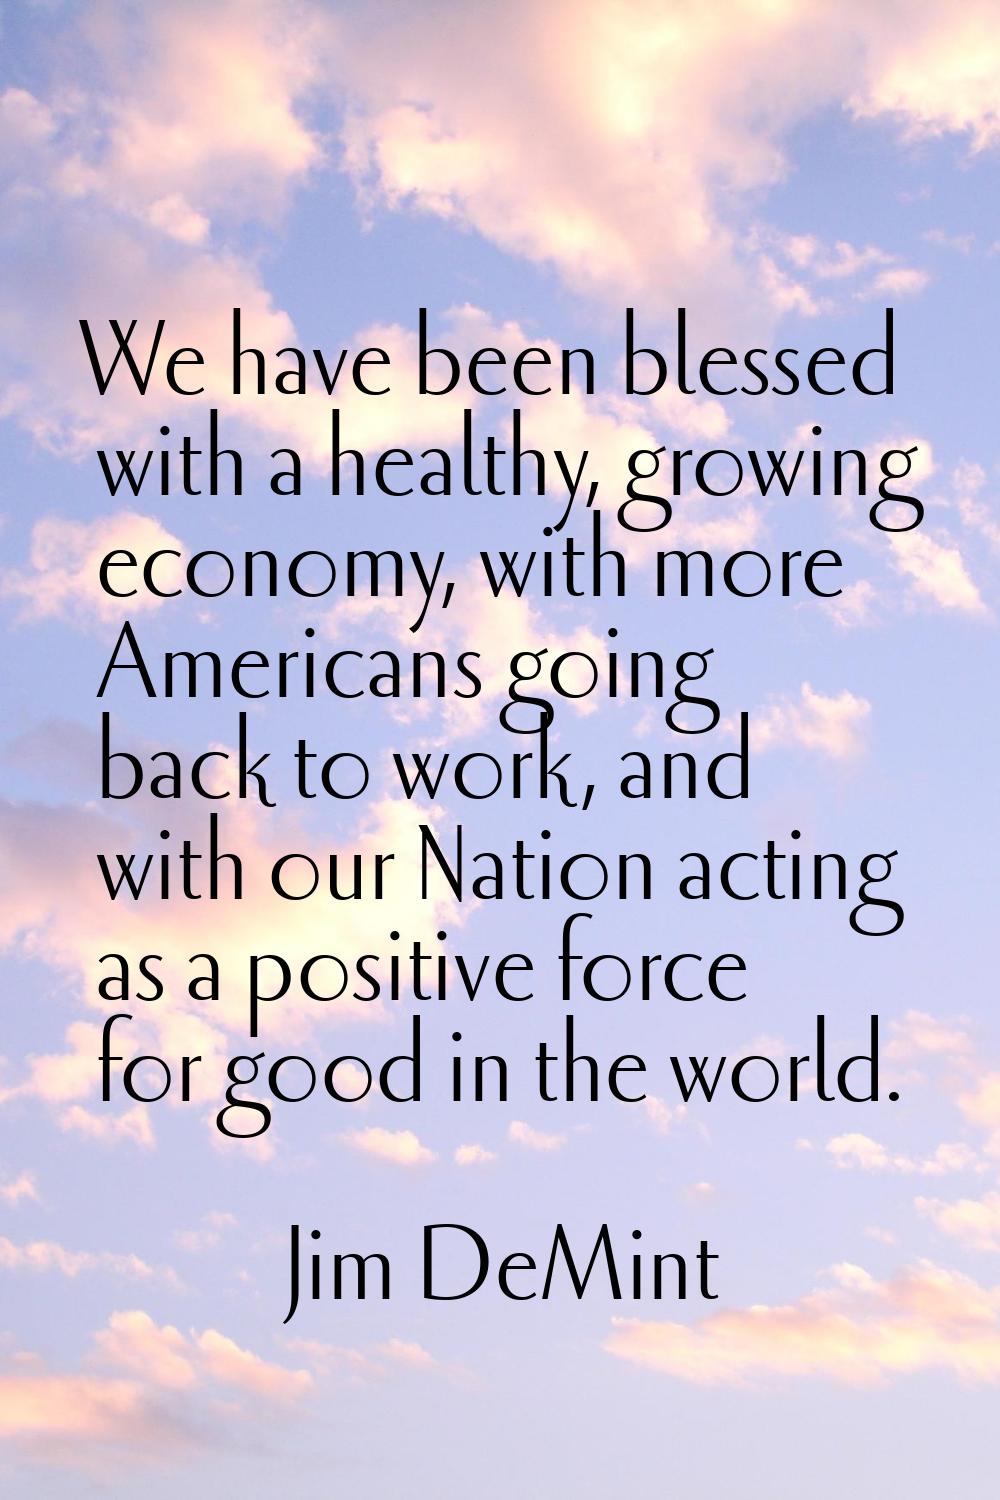 We have been blessed with a healthy, growing economy, with more Americans going back to work, and w